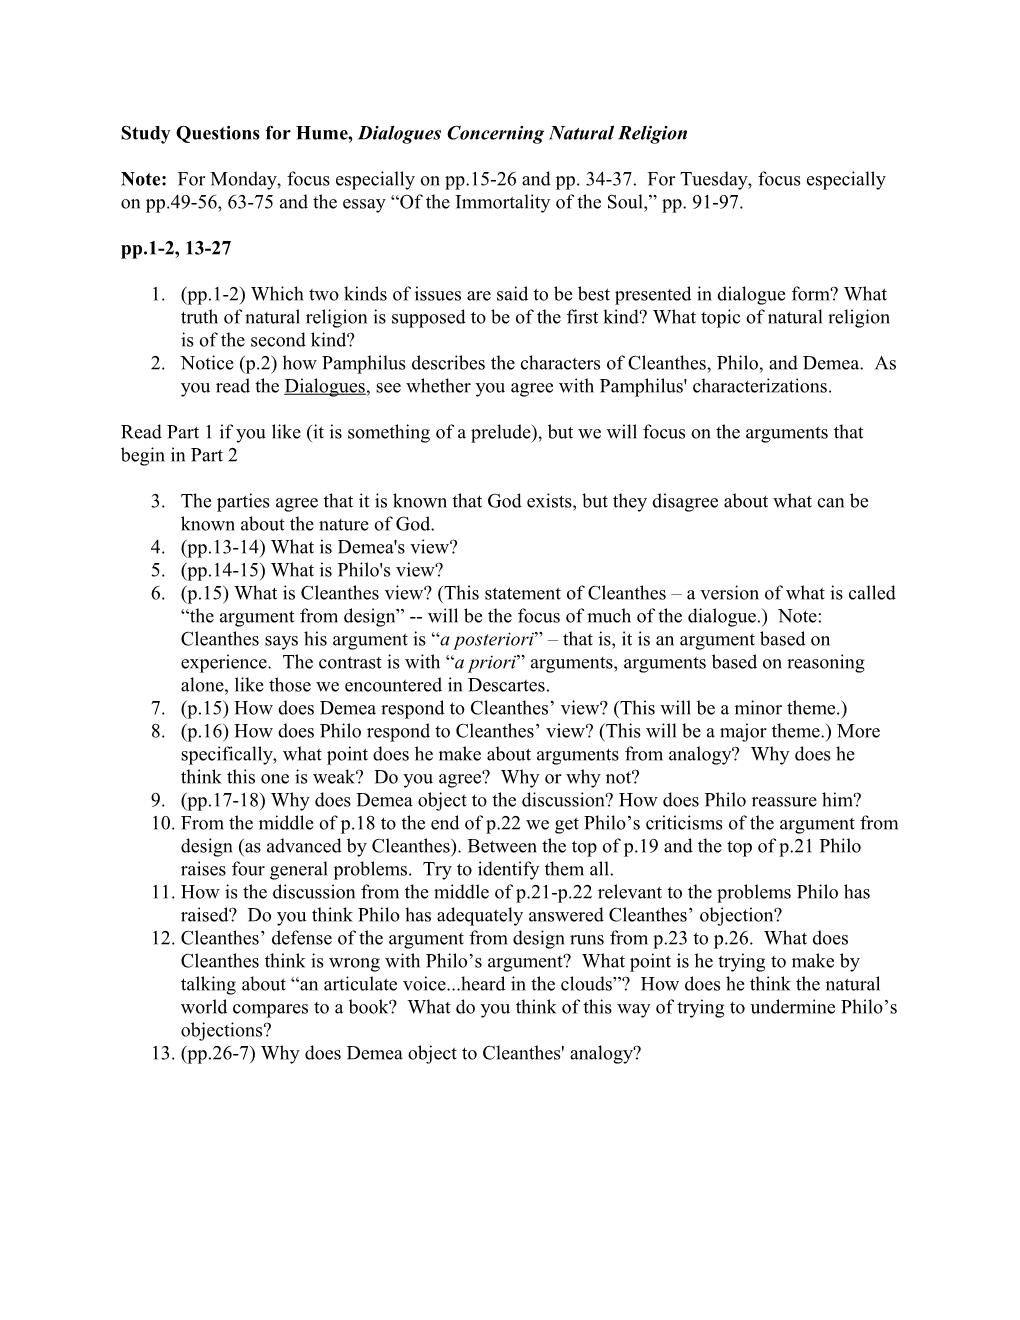 Study Questions for Hume, Dialogues Concerning Natural Religion, Pp1-2, 13-27